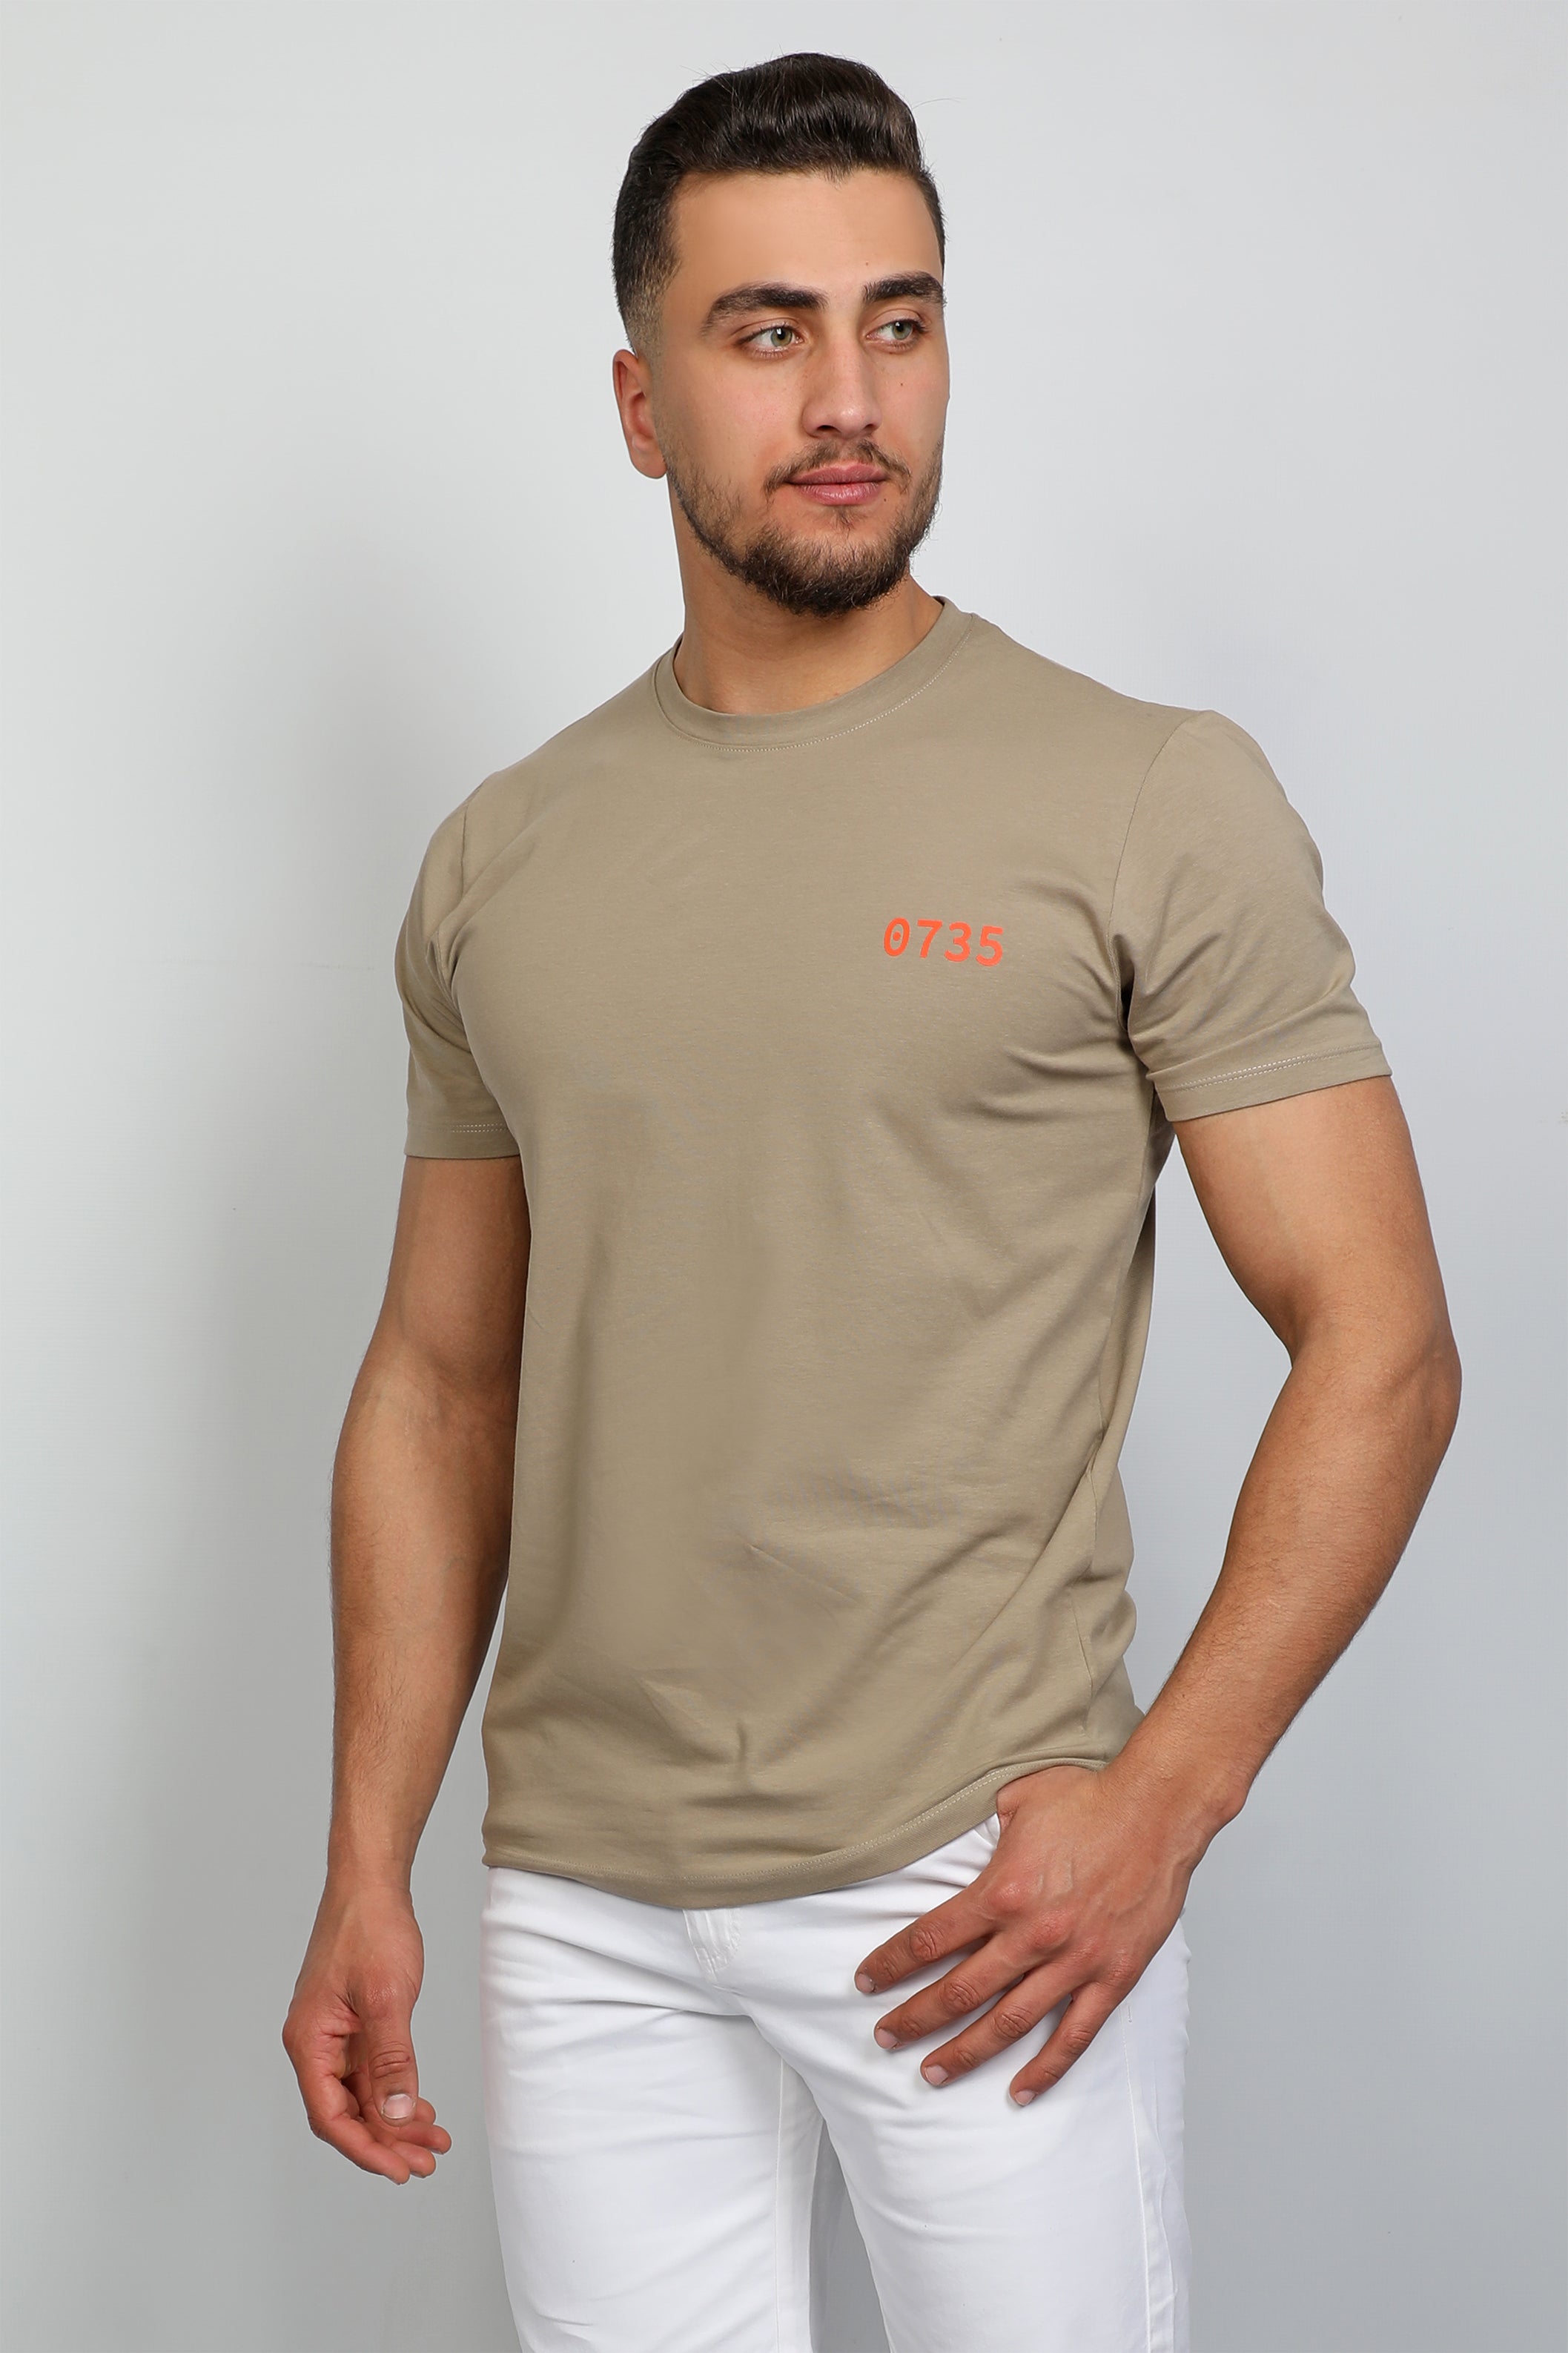 Light Khaki T-shirt With Number Front Design And Back Logo